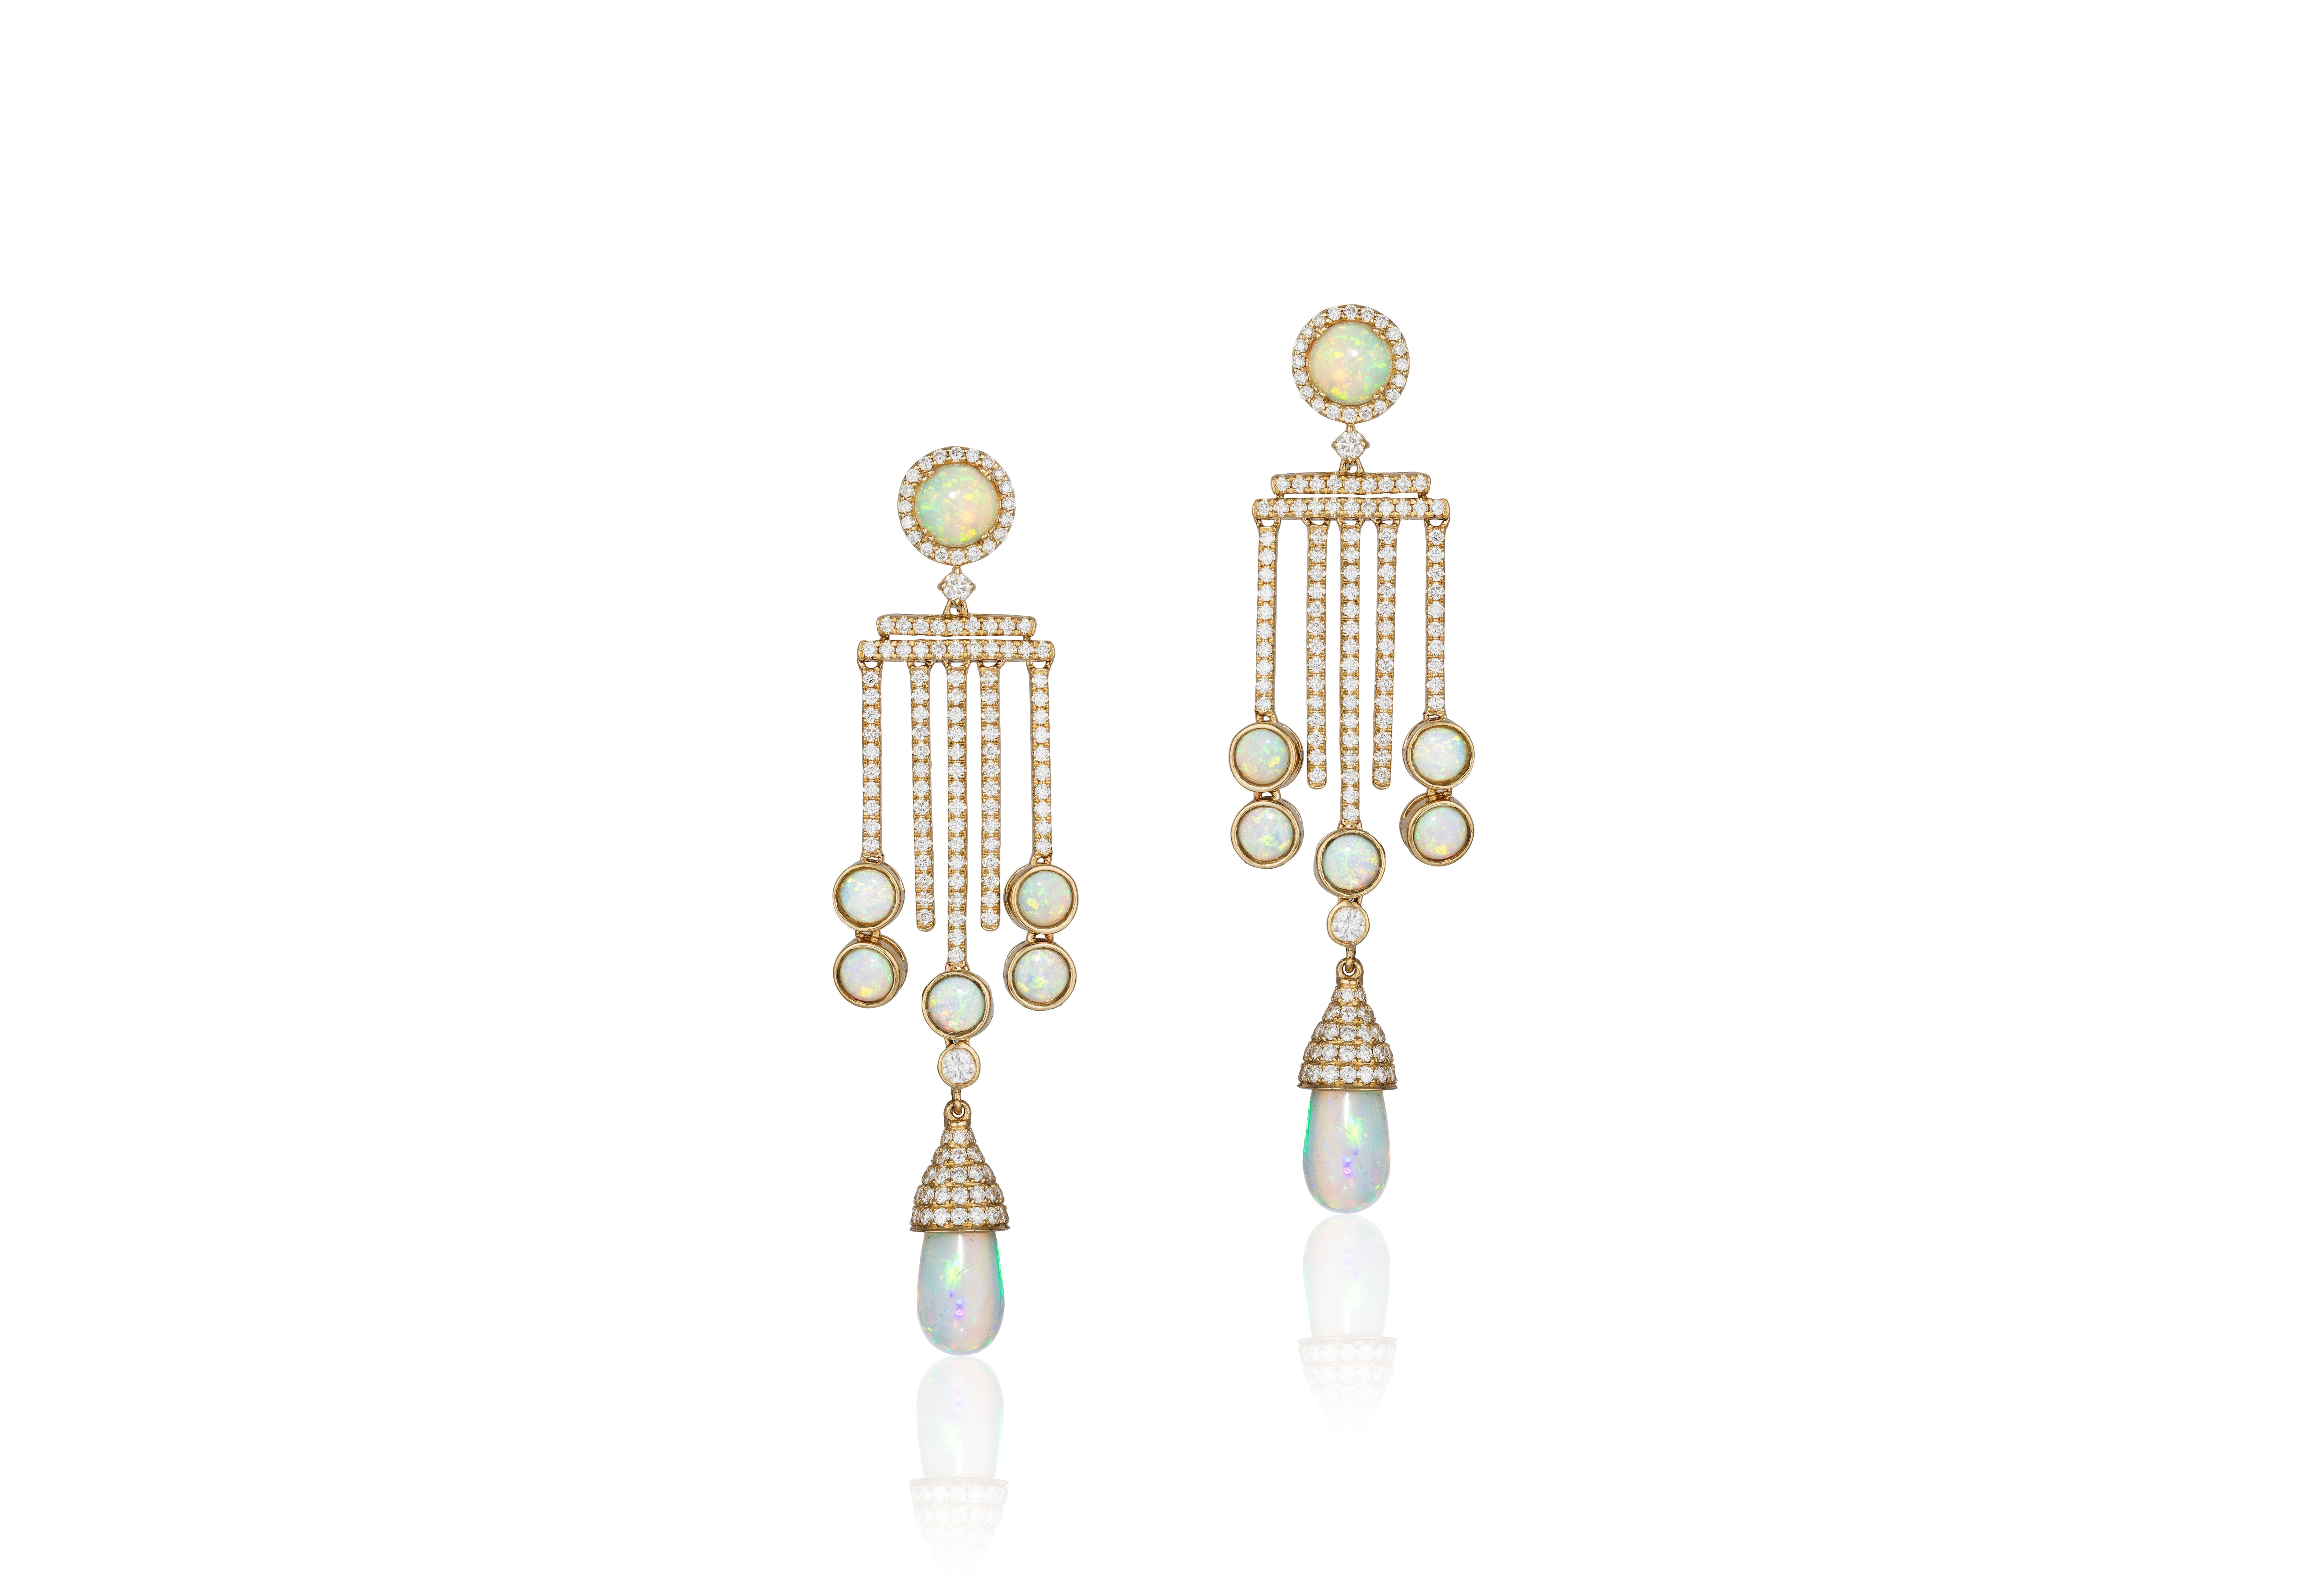 5 Bar Diamond Earrings With Opal Drops in 18K Yellow Gold, from 'G-One' Collection

Stone Size: 4 mm, 6 mm & 12.81 x 6.74 mm

Approx Weight: Opal- 8.26 Carats

Diamond: G-H / VS, Approx Wt: 2.33 Carats